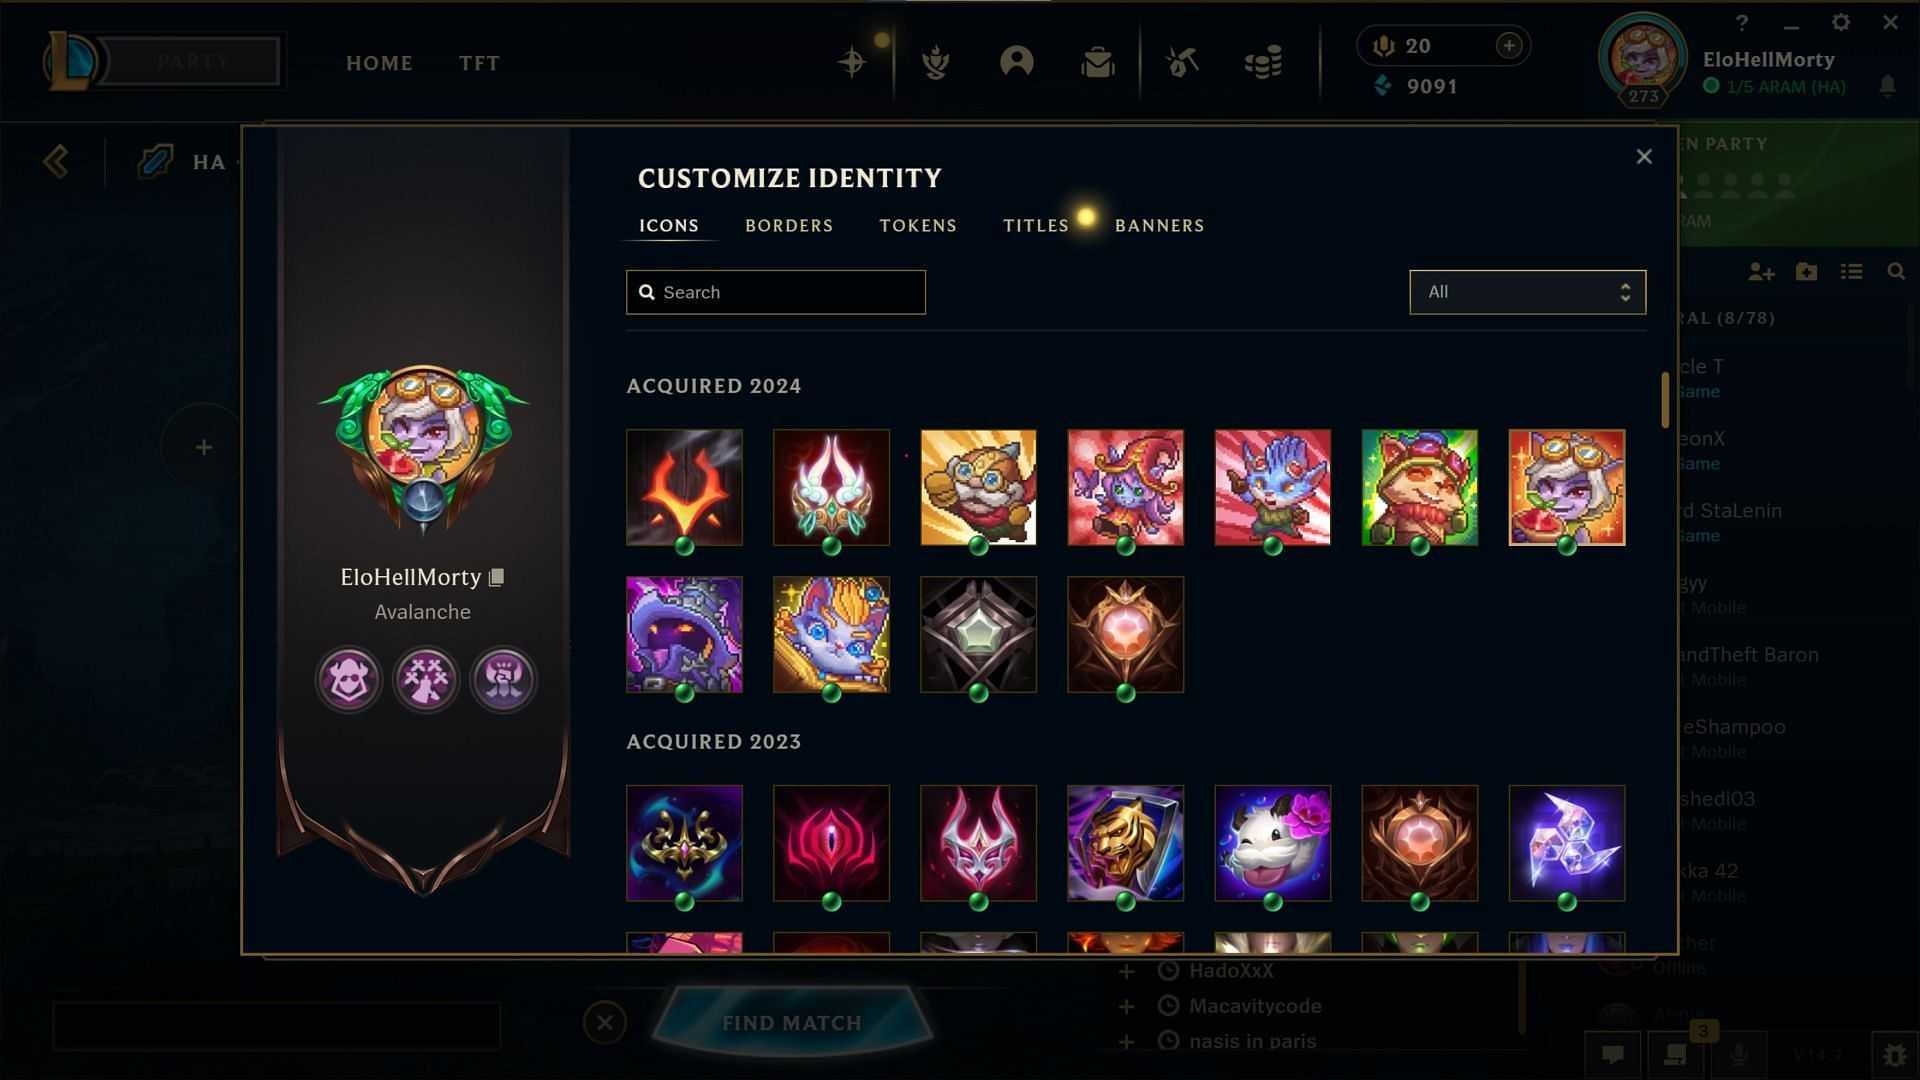 Customize identity in the Client (Image via Riot Games)